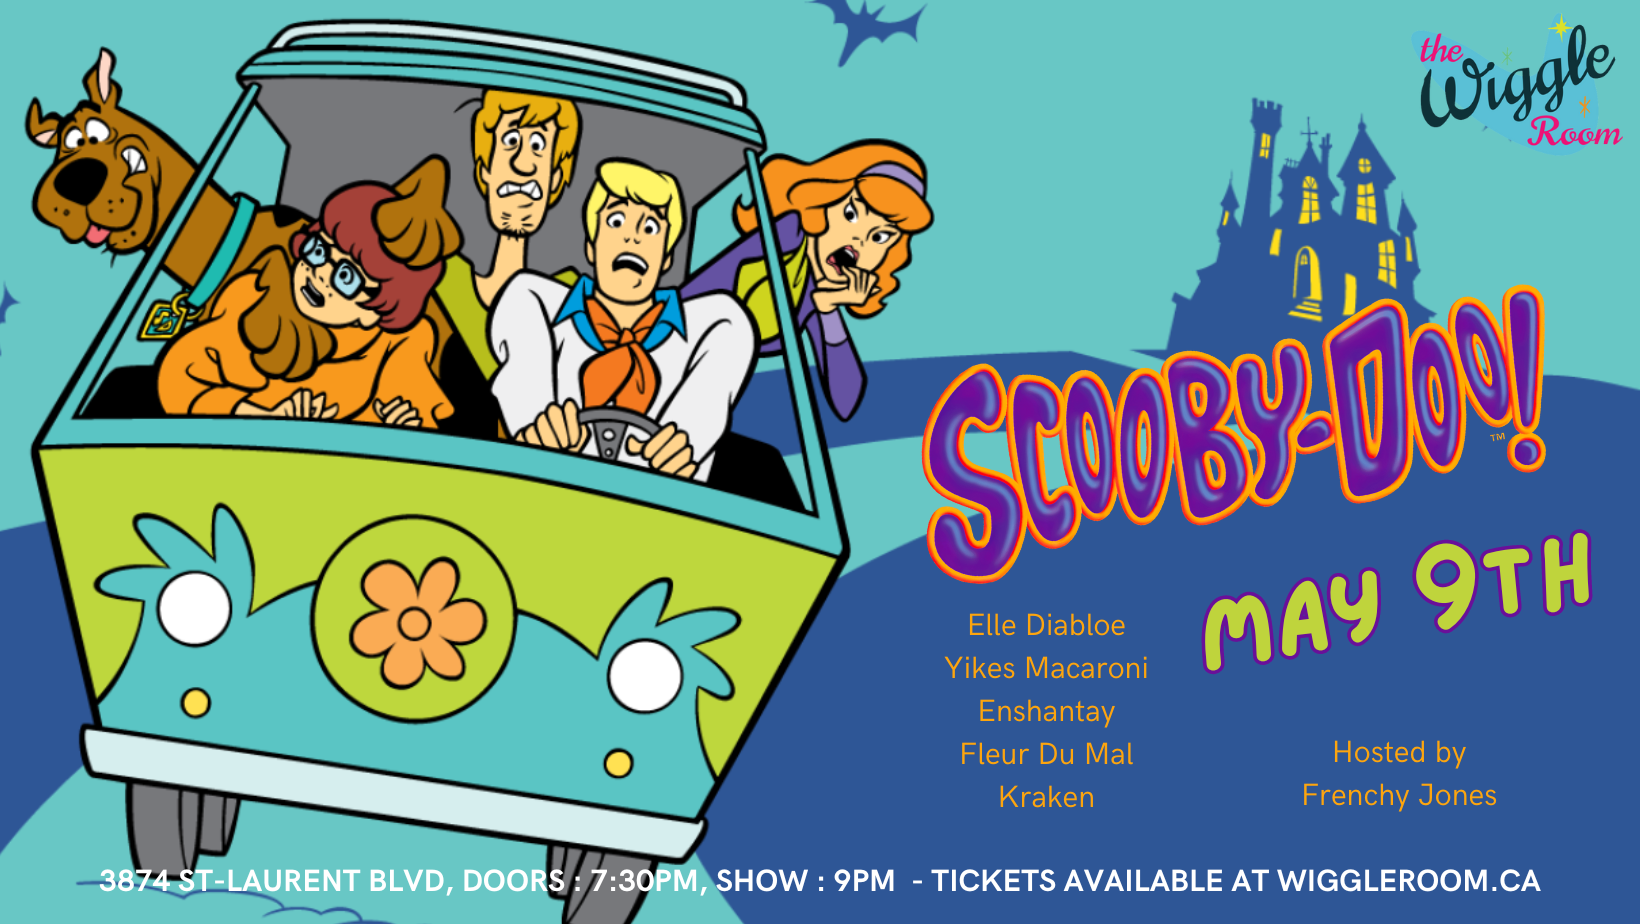 Scooby-Doo Burlesque at The Wiggle Room